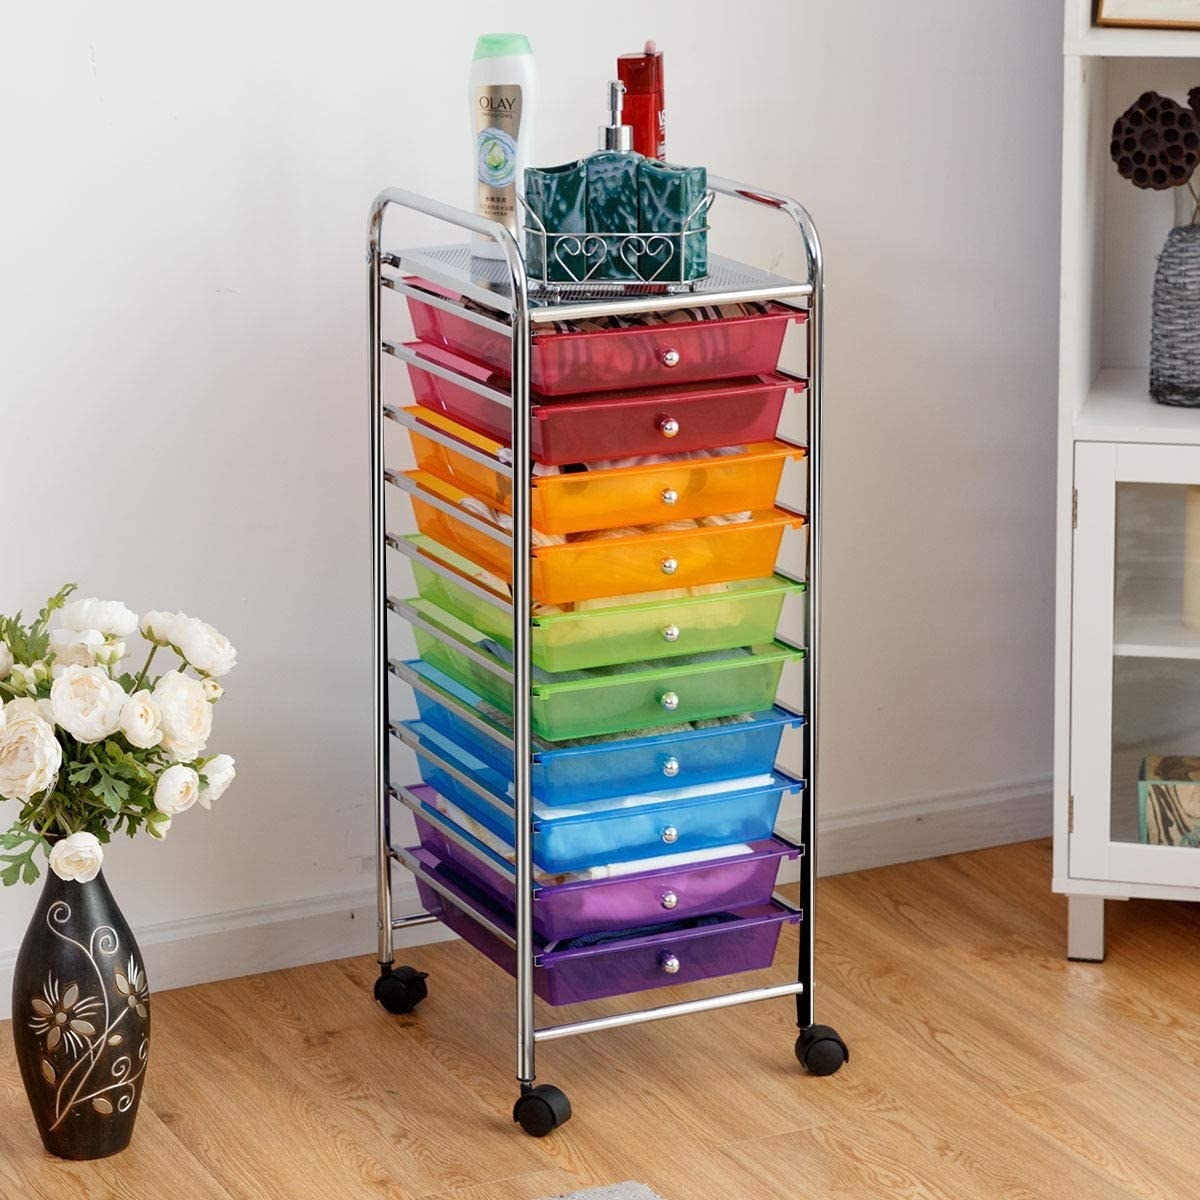 rolling cart with rainbow drawers